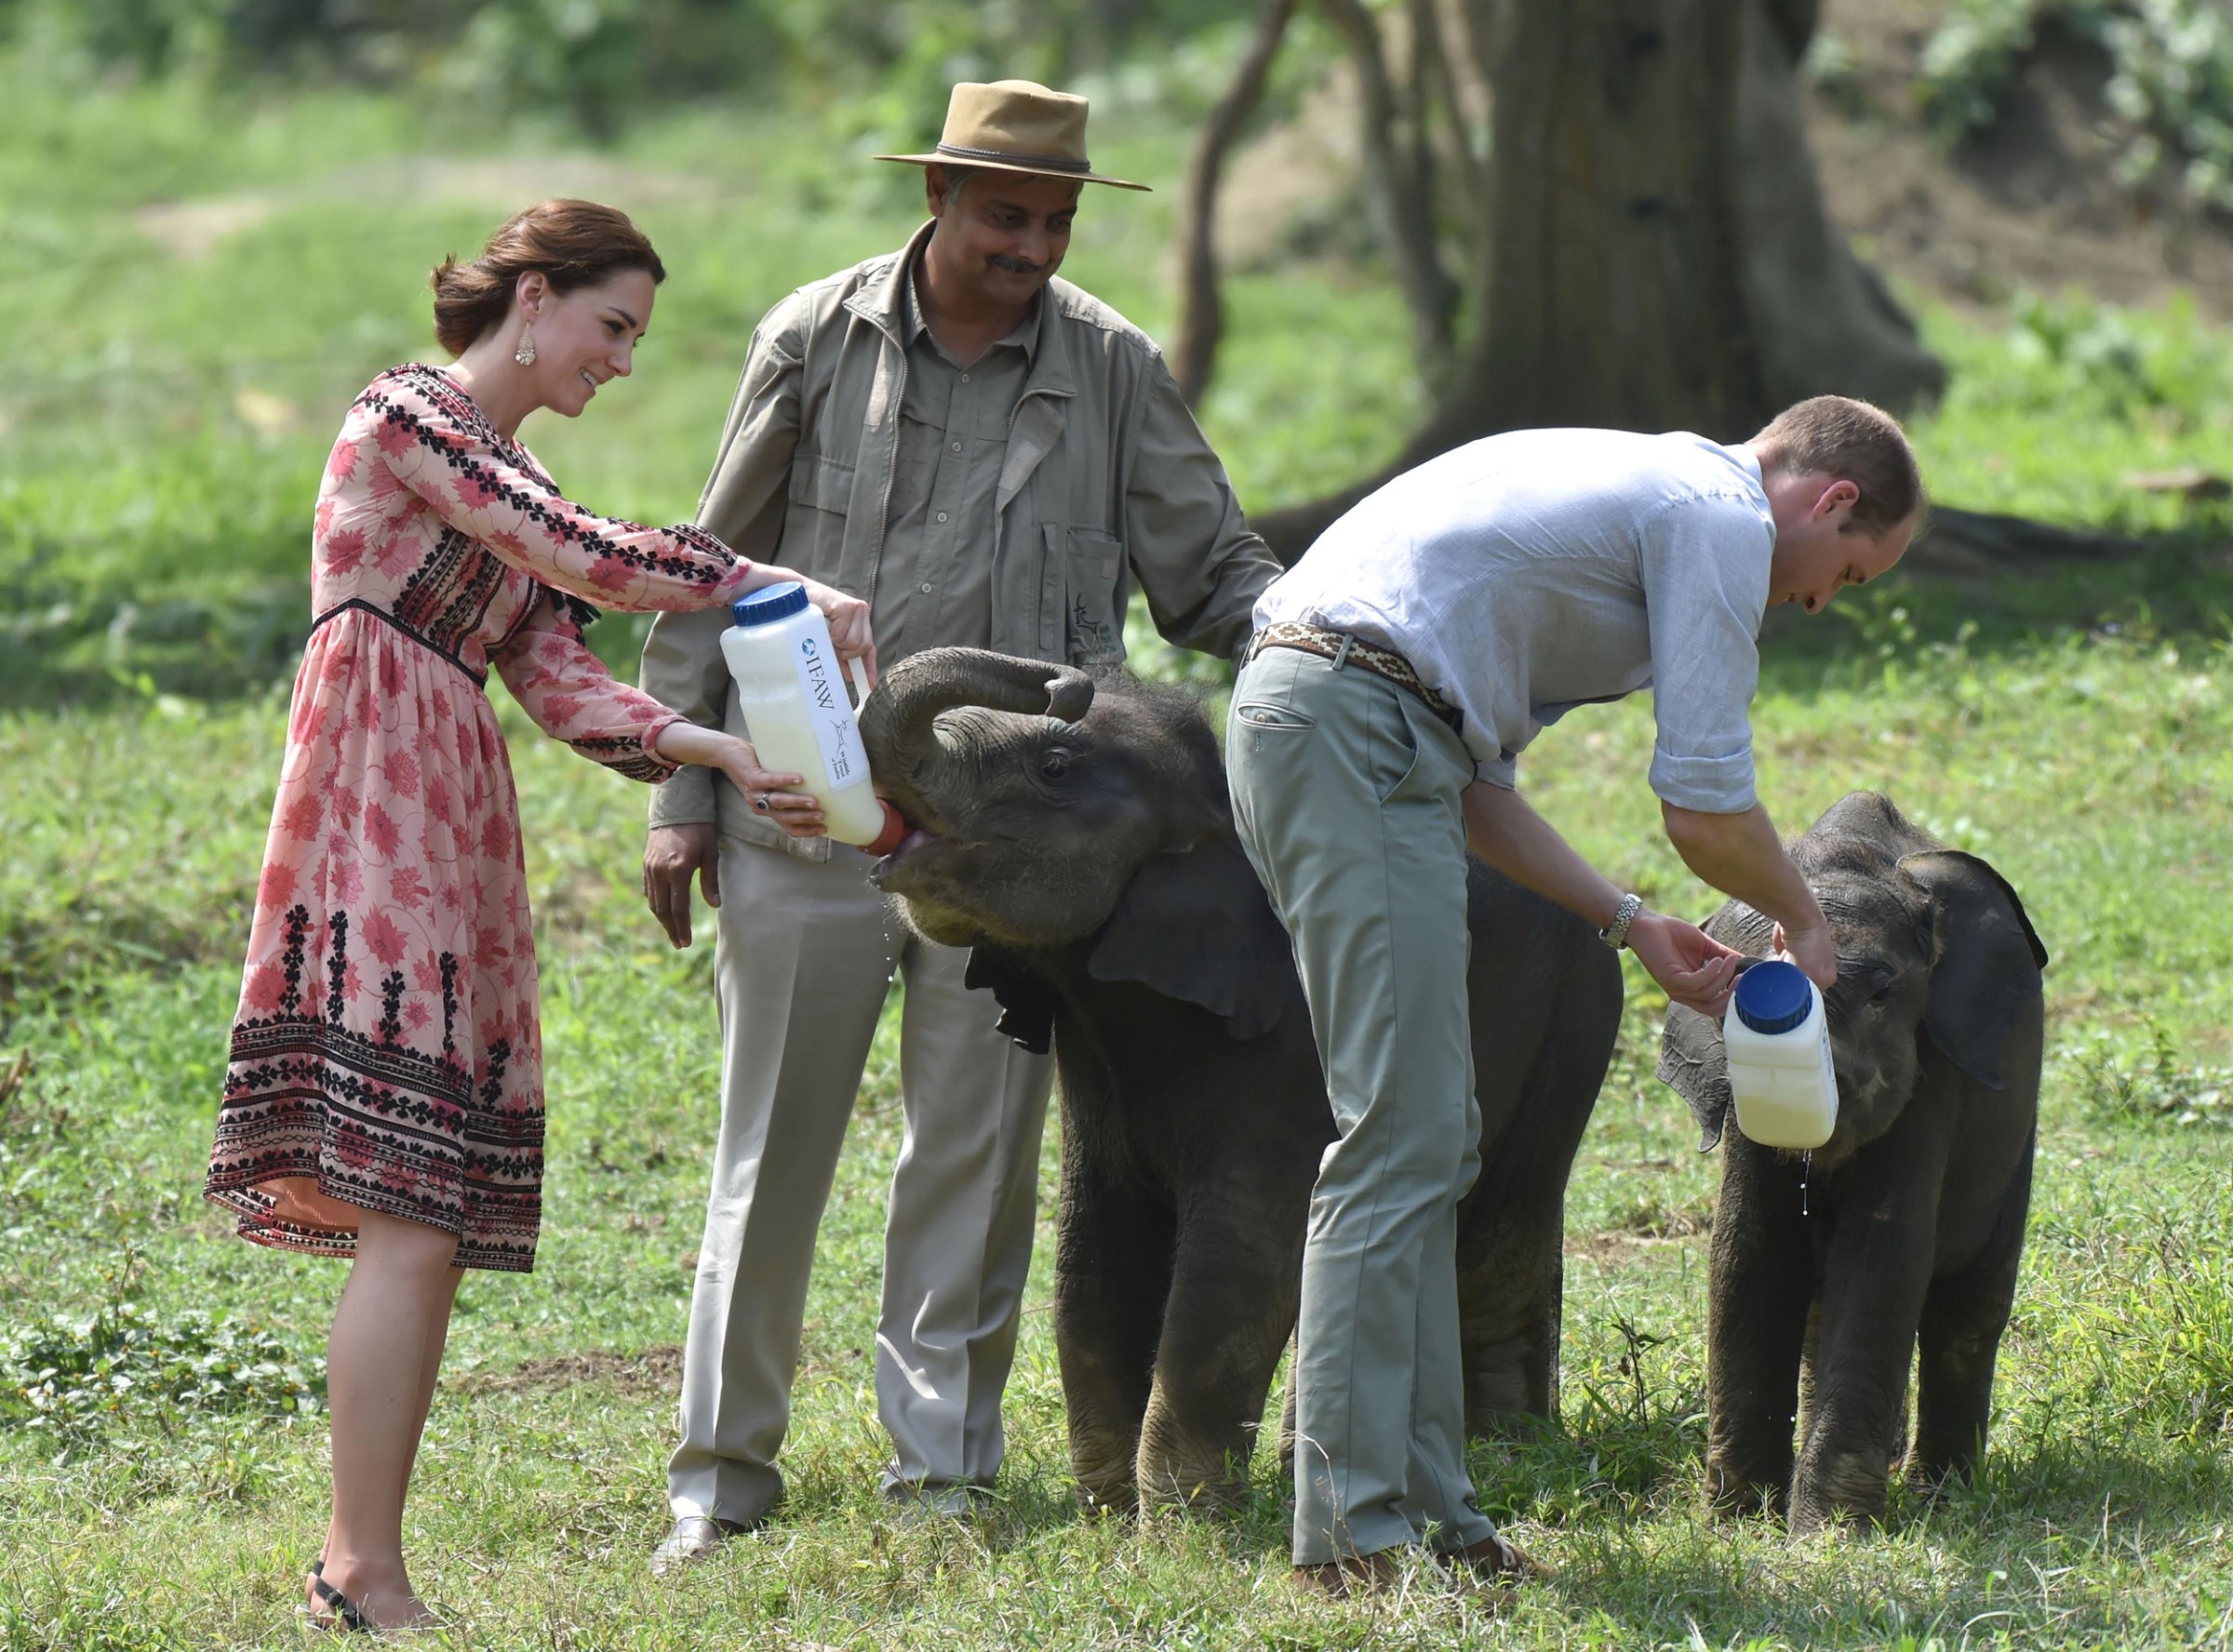 Catherine, Duchess of Cambridge and Prince William, Duke of Cambridge visit the Centre for Wildlife Rehabilitation and Conservation at Kaziranga National Park in Guwahati, India on April 13, 2016.